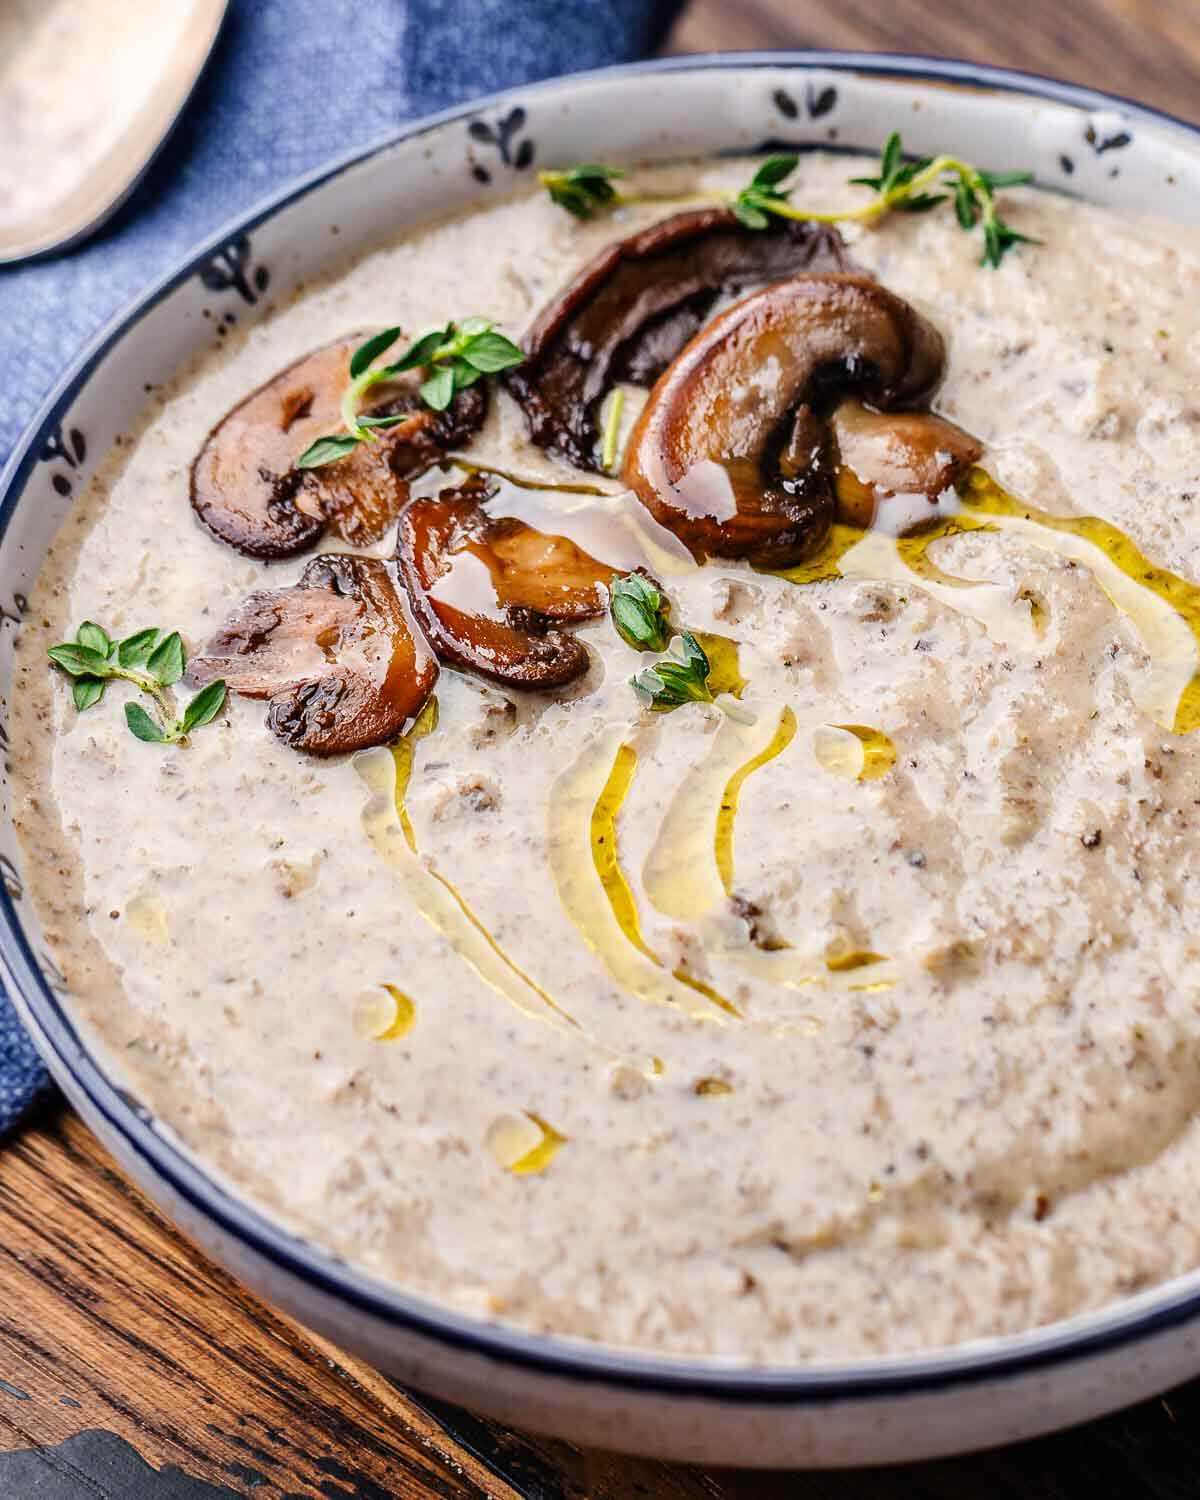 White and blue bowl with creamy mushroom soup along with mushroom and thyme garnish.